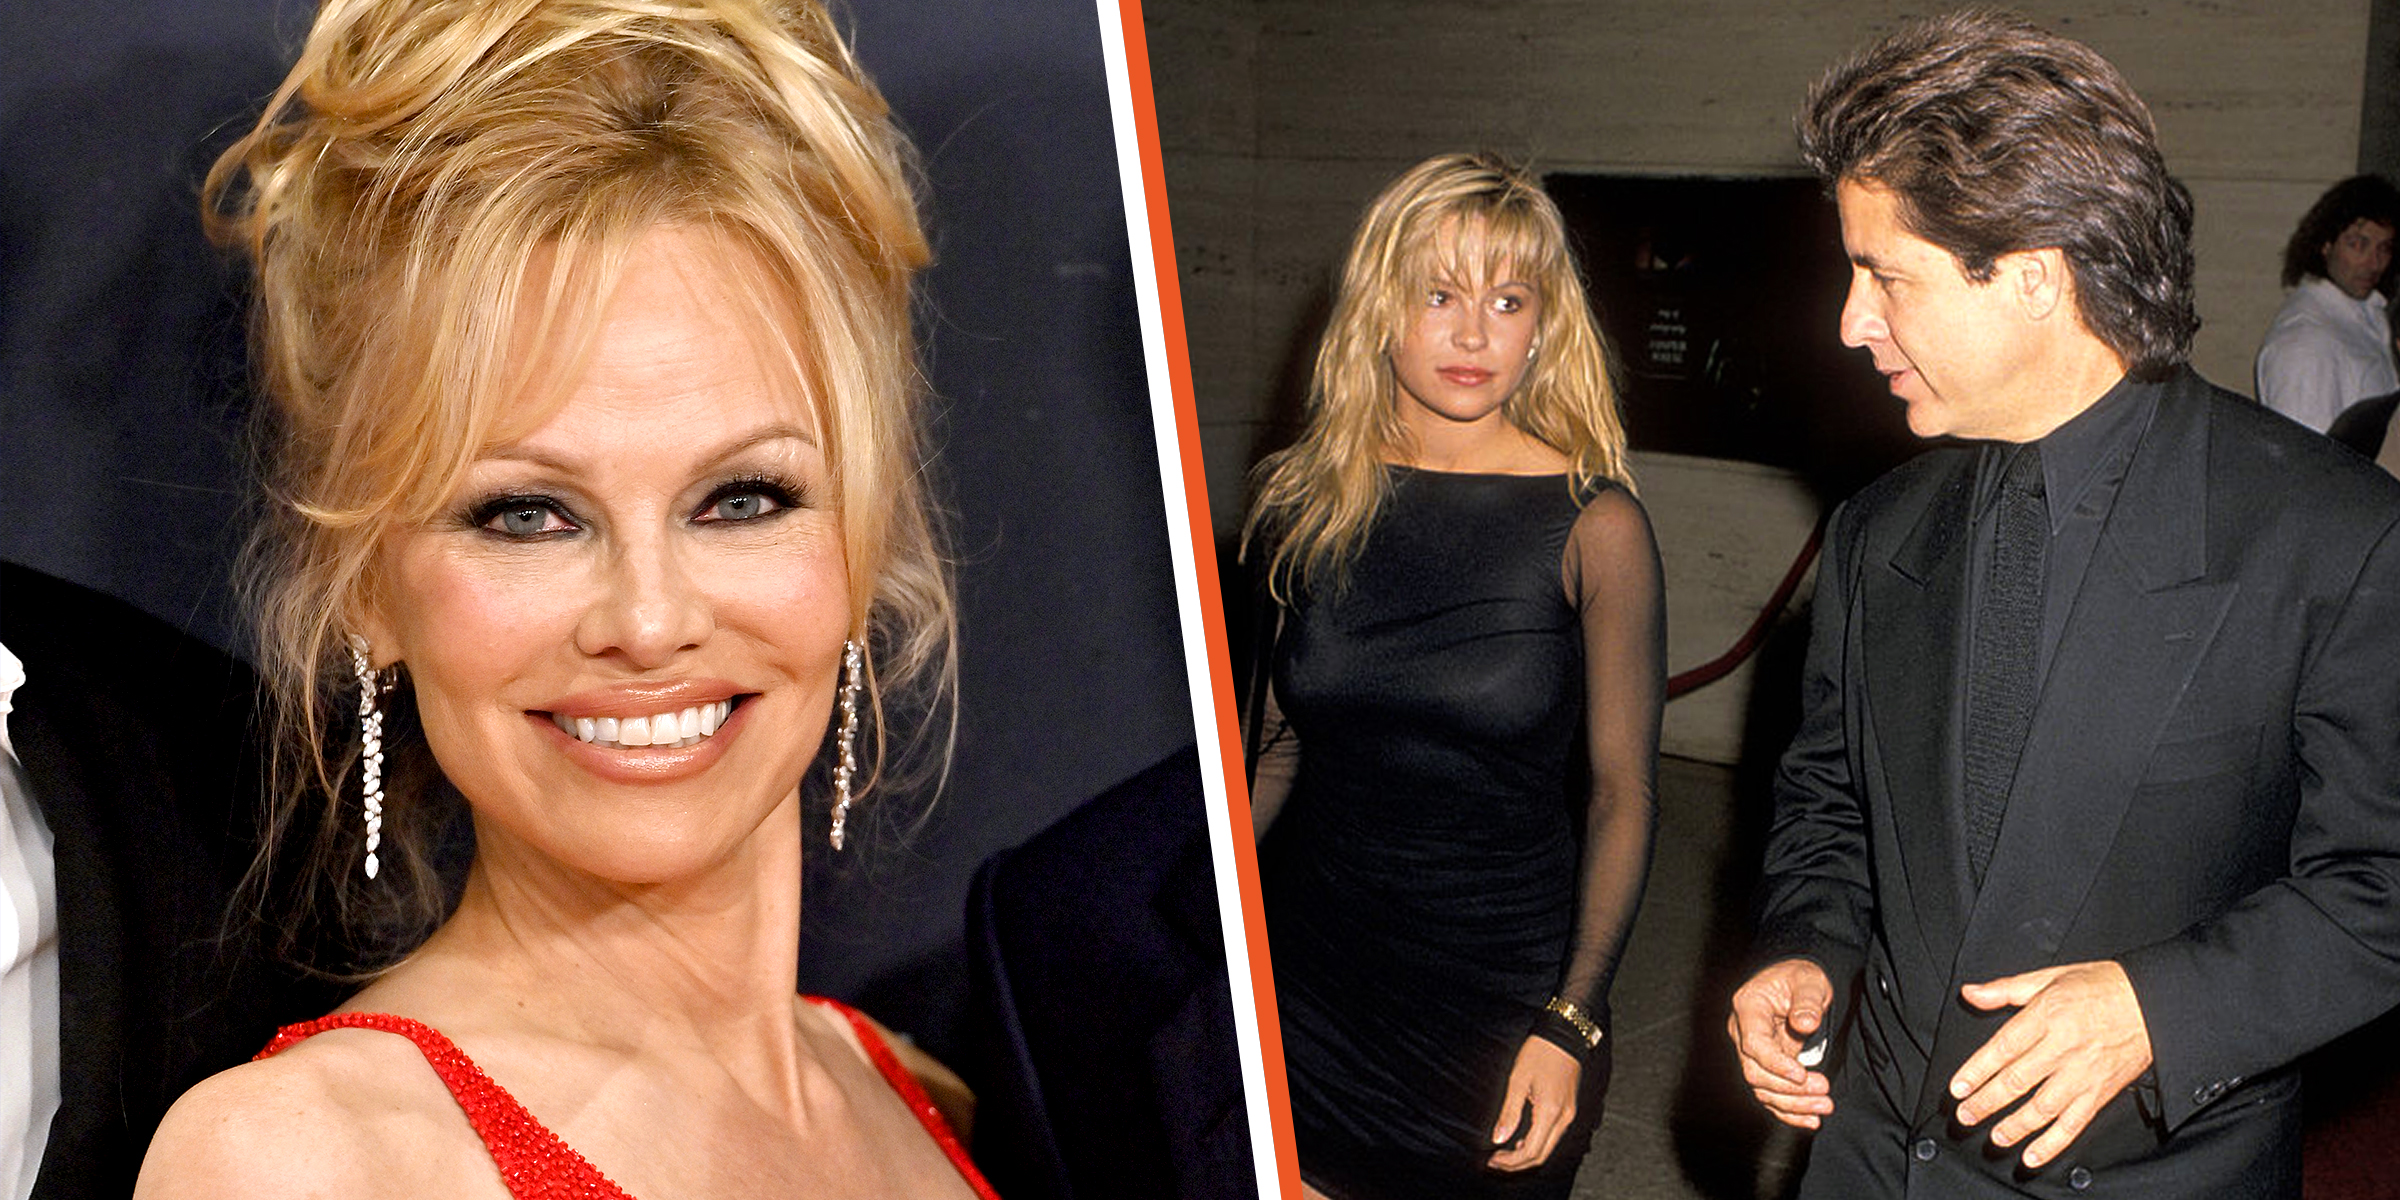 Pamela Anderson | Pamela Anderson and Jon Peters | Source: Getty Images